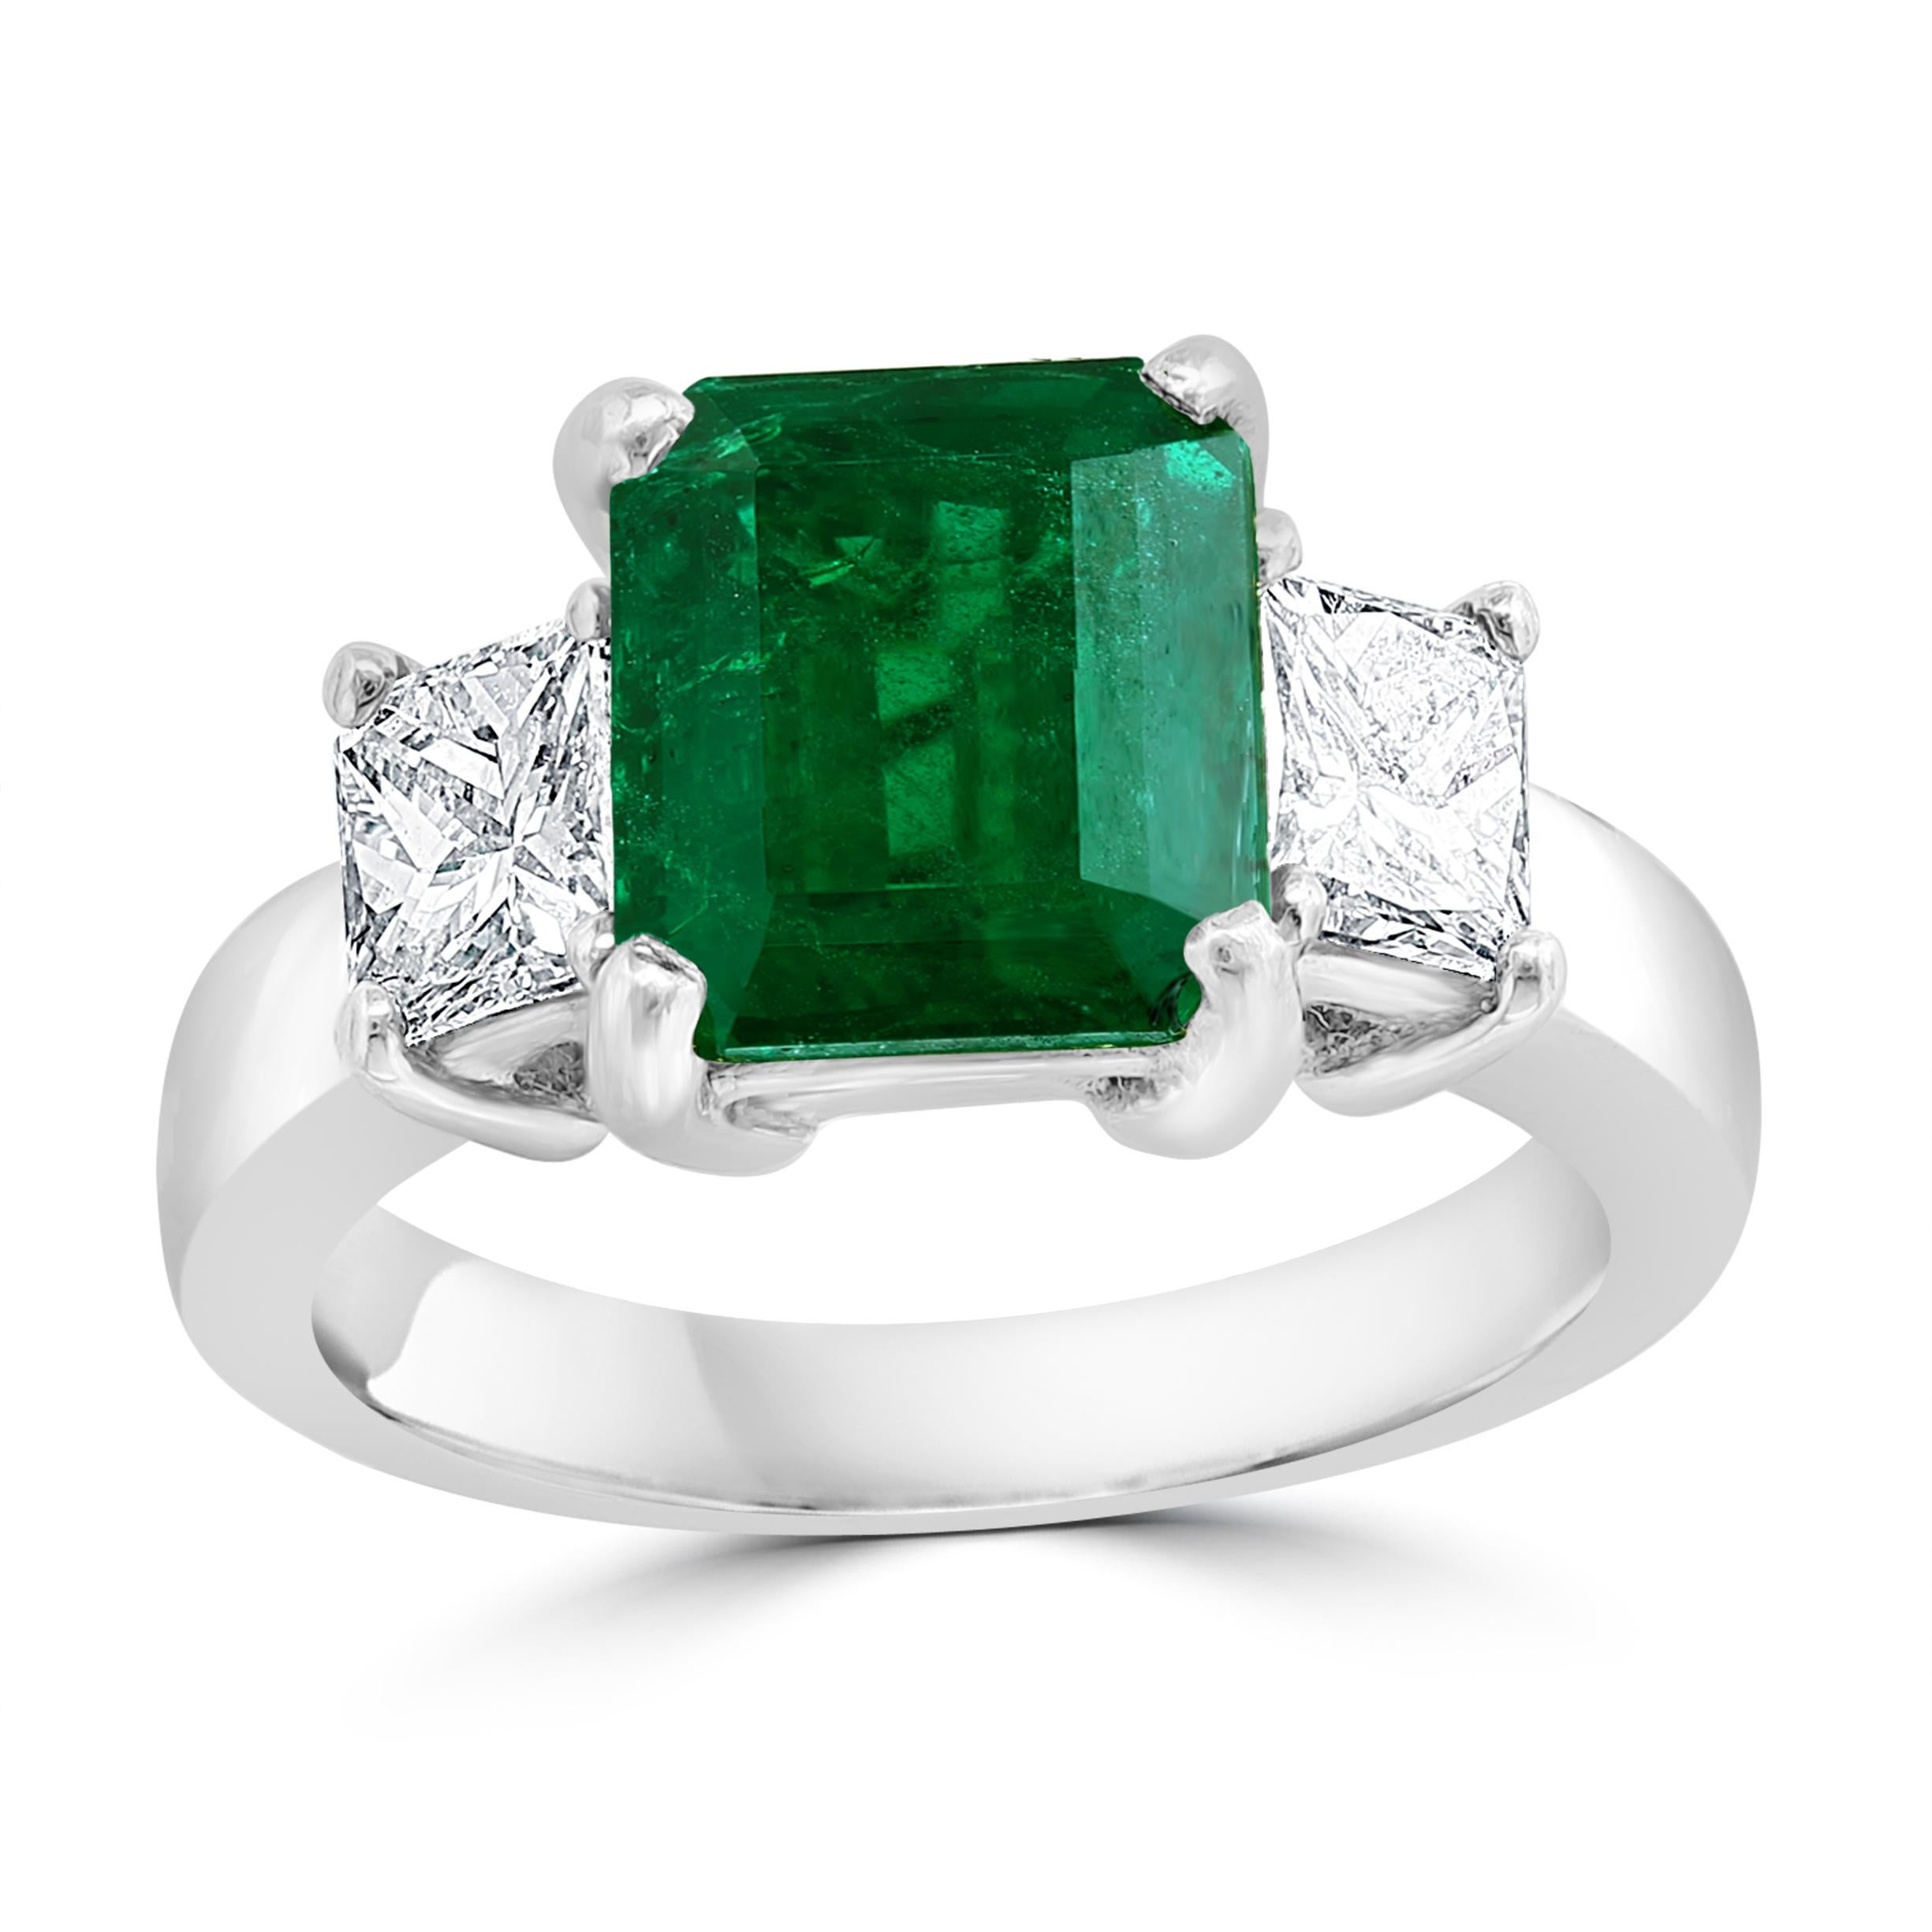 2.47 ct. colombian emerald engagement ring made in 18k white gold